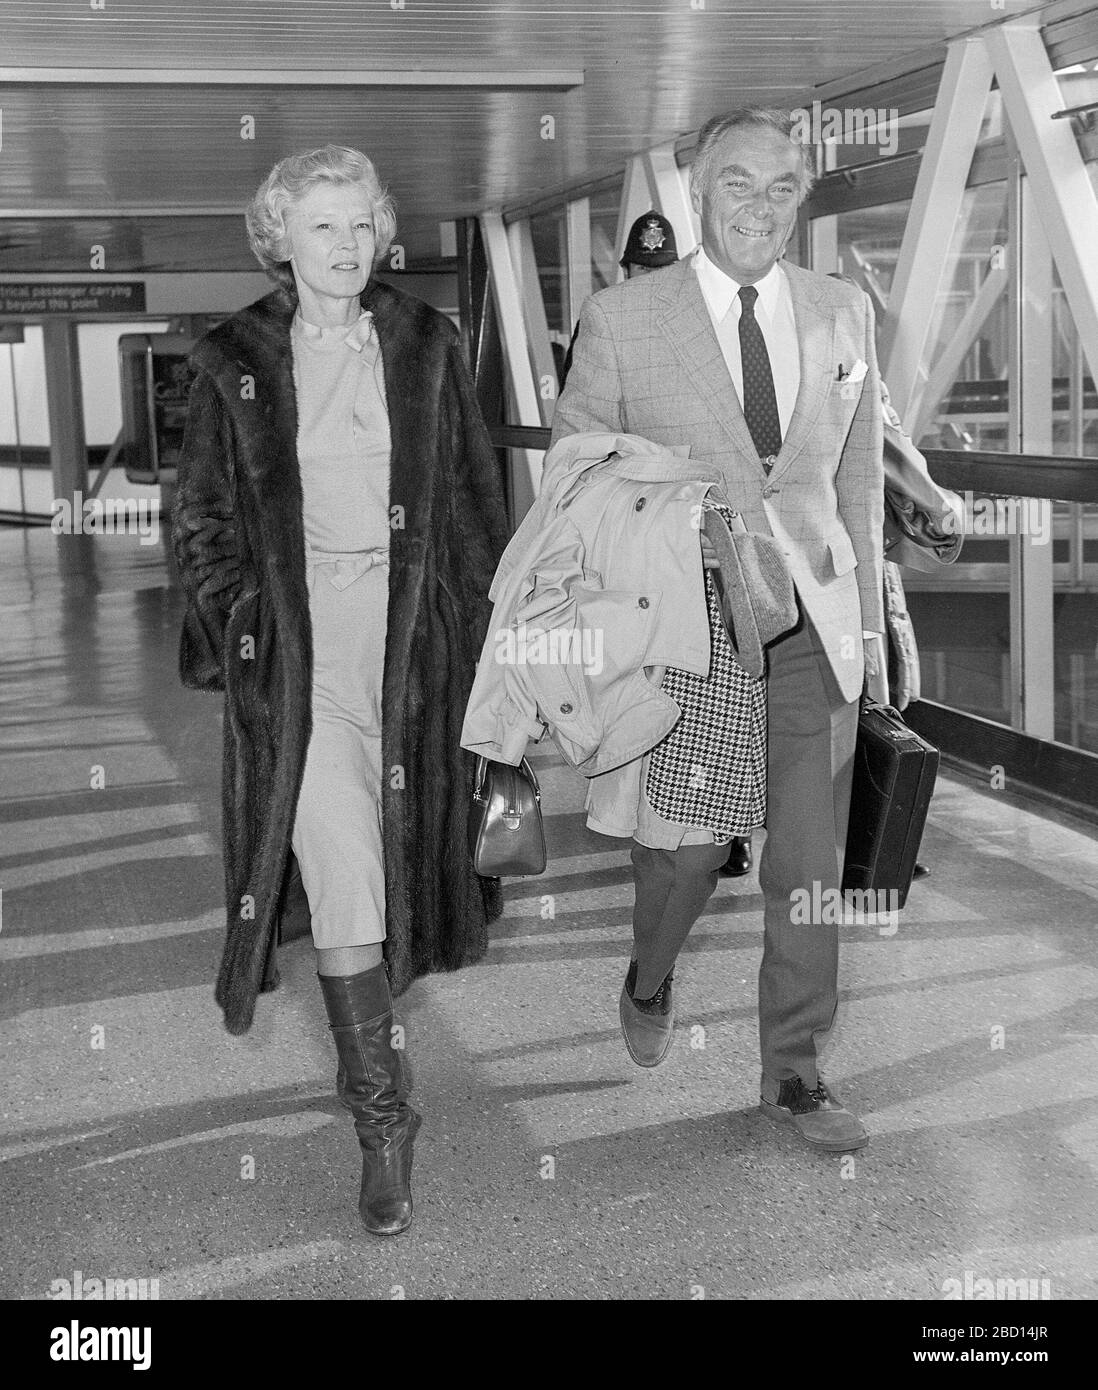 U.S. secretary of State Alexander Haig with his wife Patricia arriving at London's Heathrow Airport in February 1983. Stock Photo